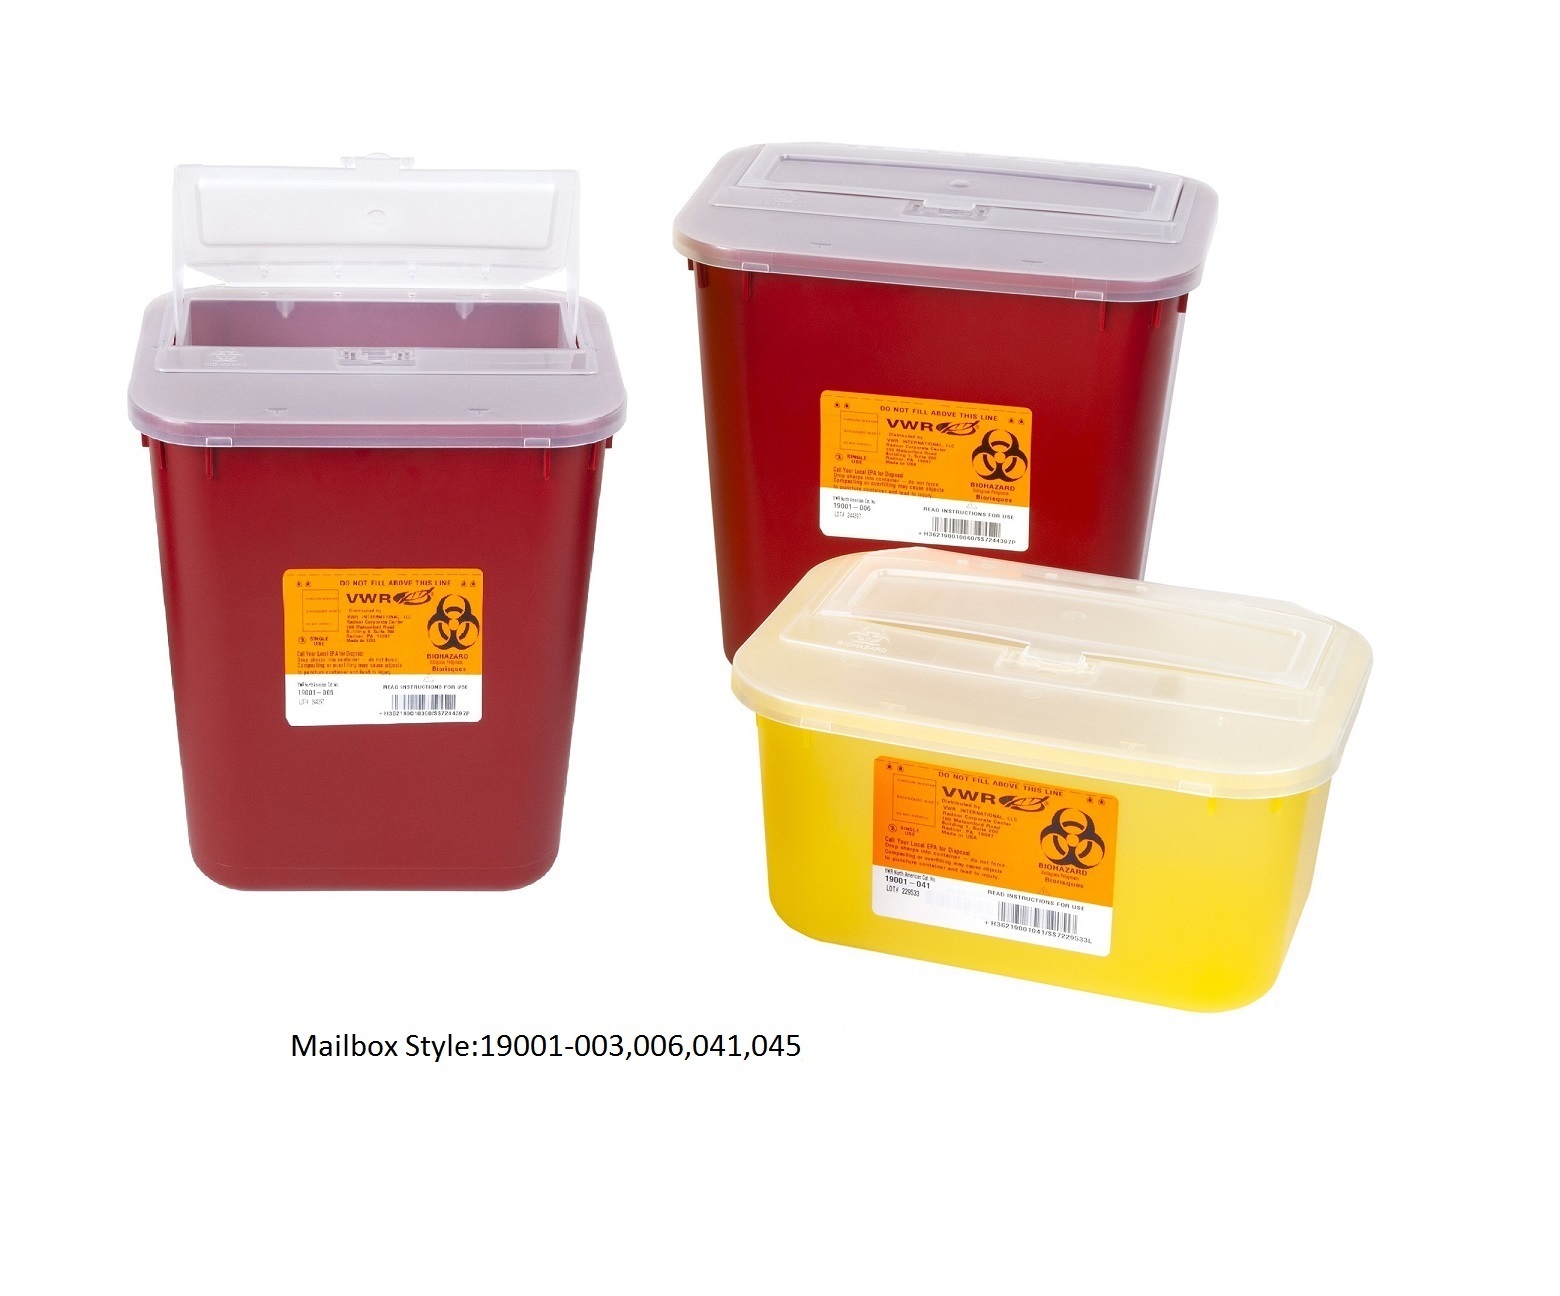 VWR® Sharps Container Systems, Multiple Colors and Styles